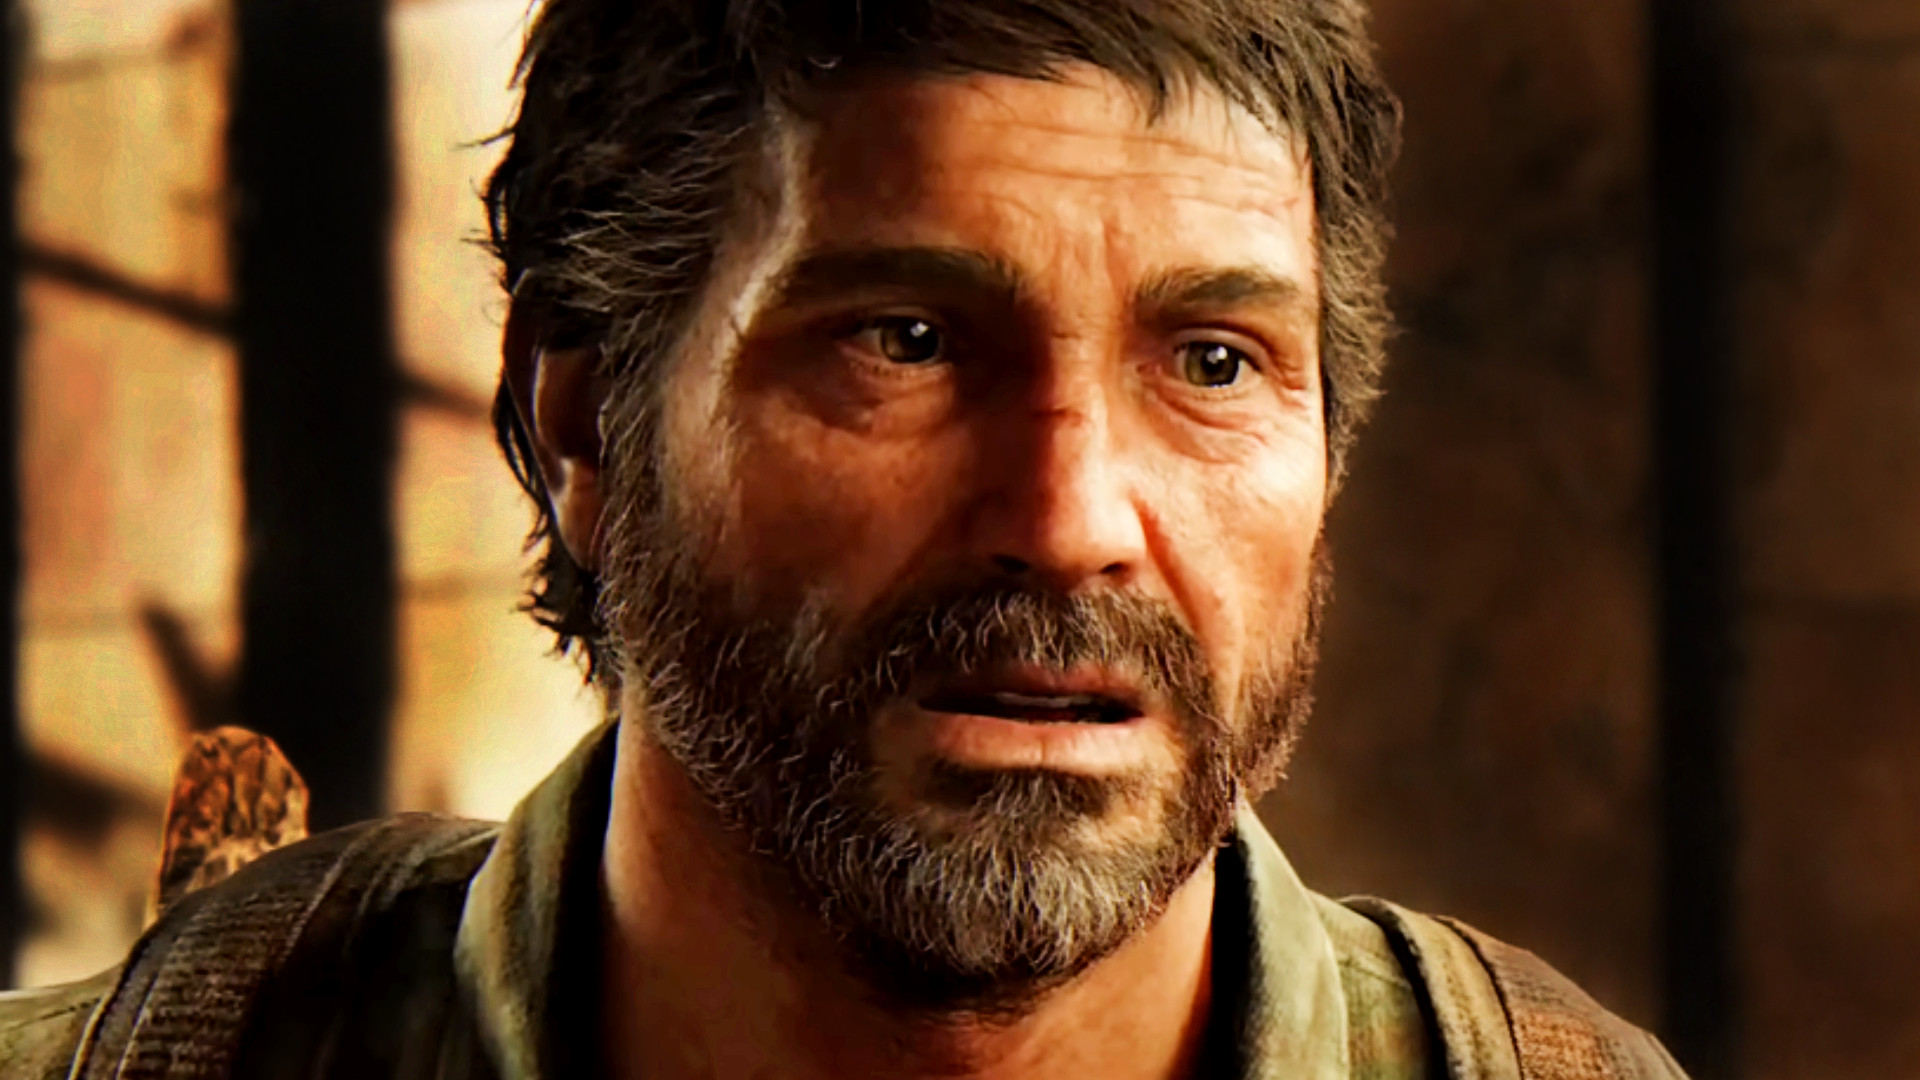 The Last of Us Part 1 First Person Mod Receives New Gameplay Video